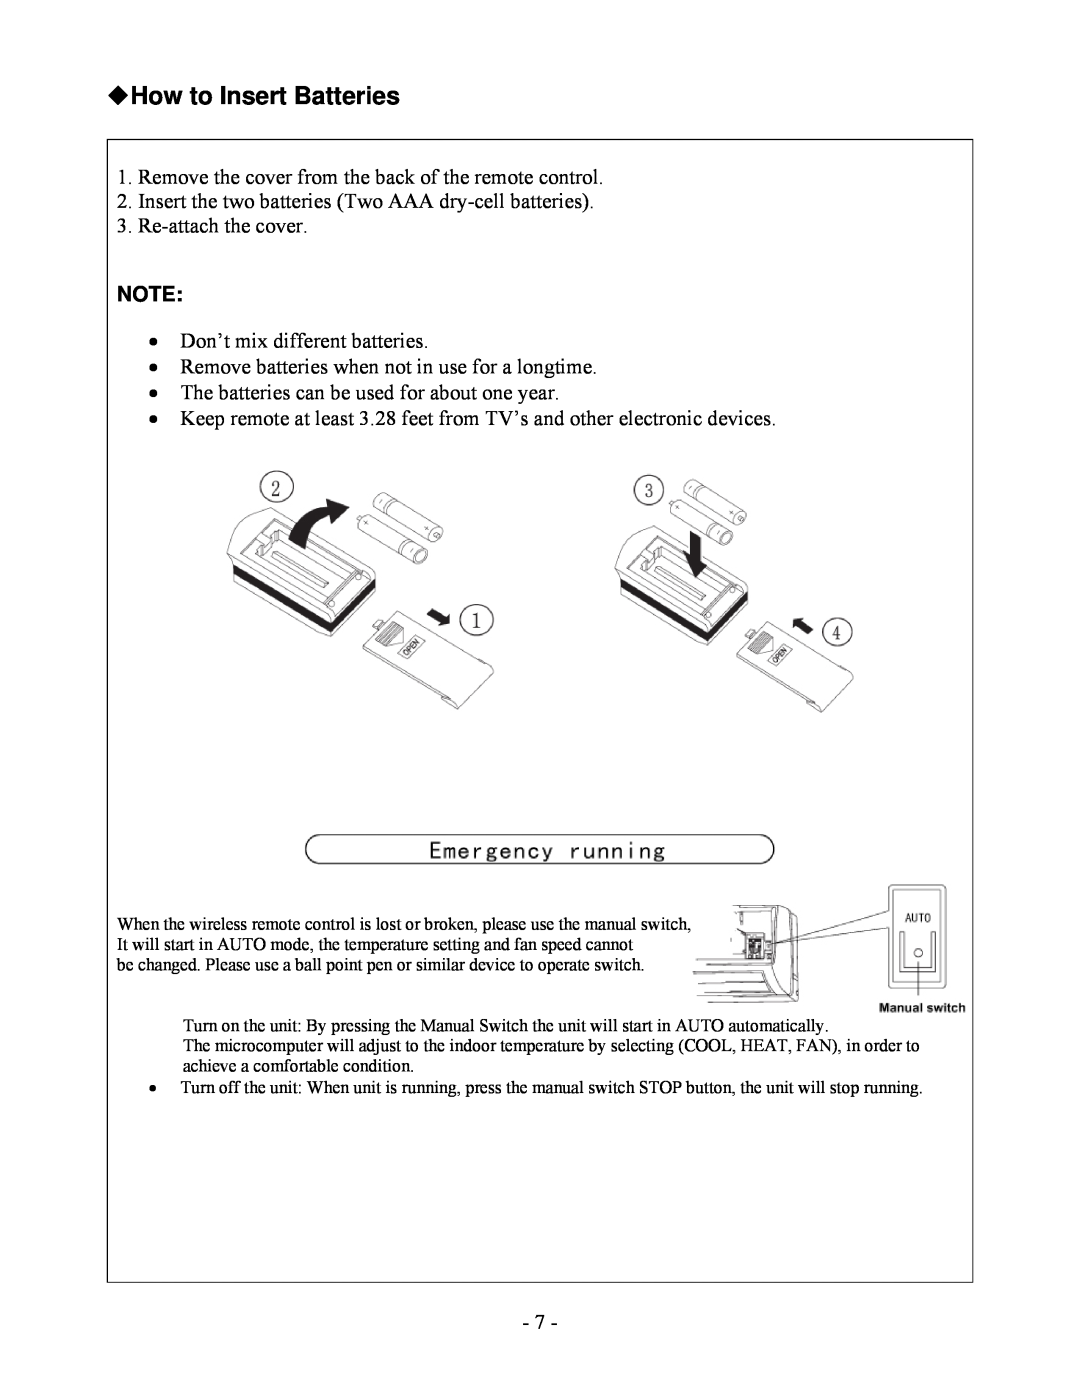 Soleus Air KFHIP-09-OD installation manual How to Insert Batteries 